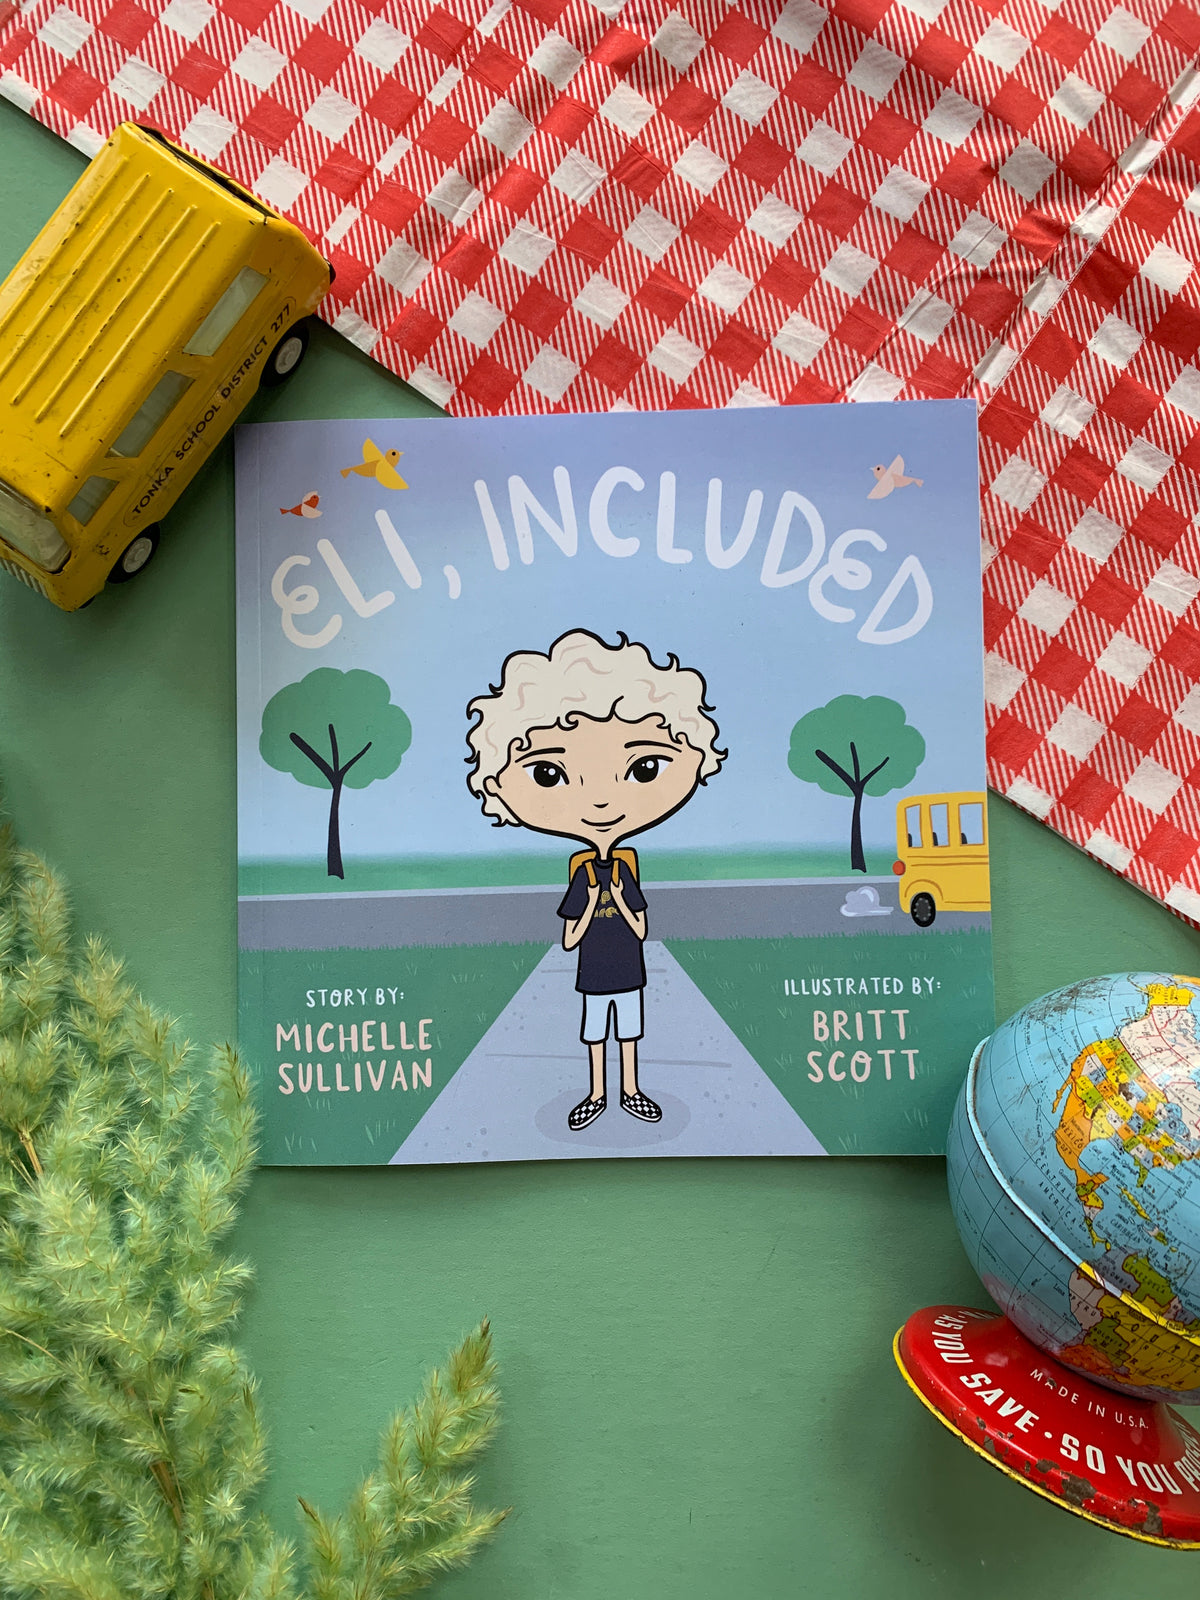 Eli, Included Book by Michelle Sullivan | Sweet Threads